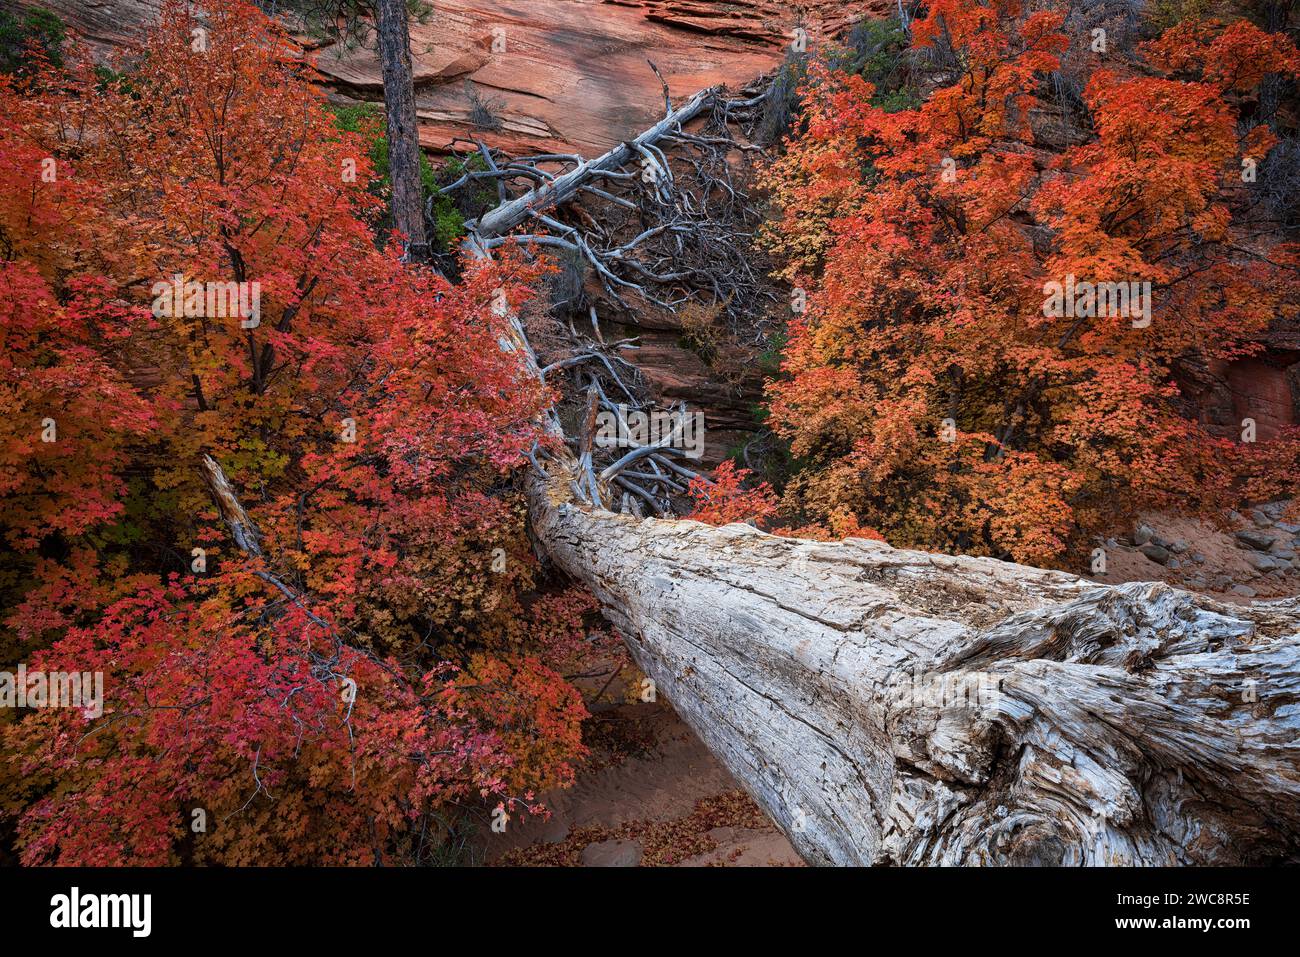 Shattered pine snag and bigtooth maples in the Clear Creek section of Zion National Park, Utah Stock Photo